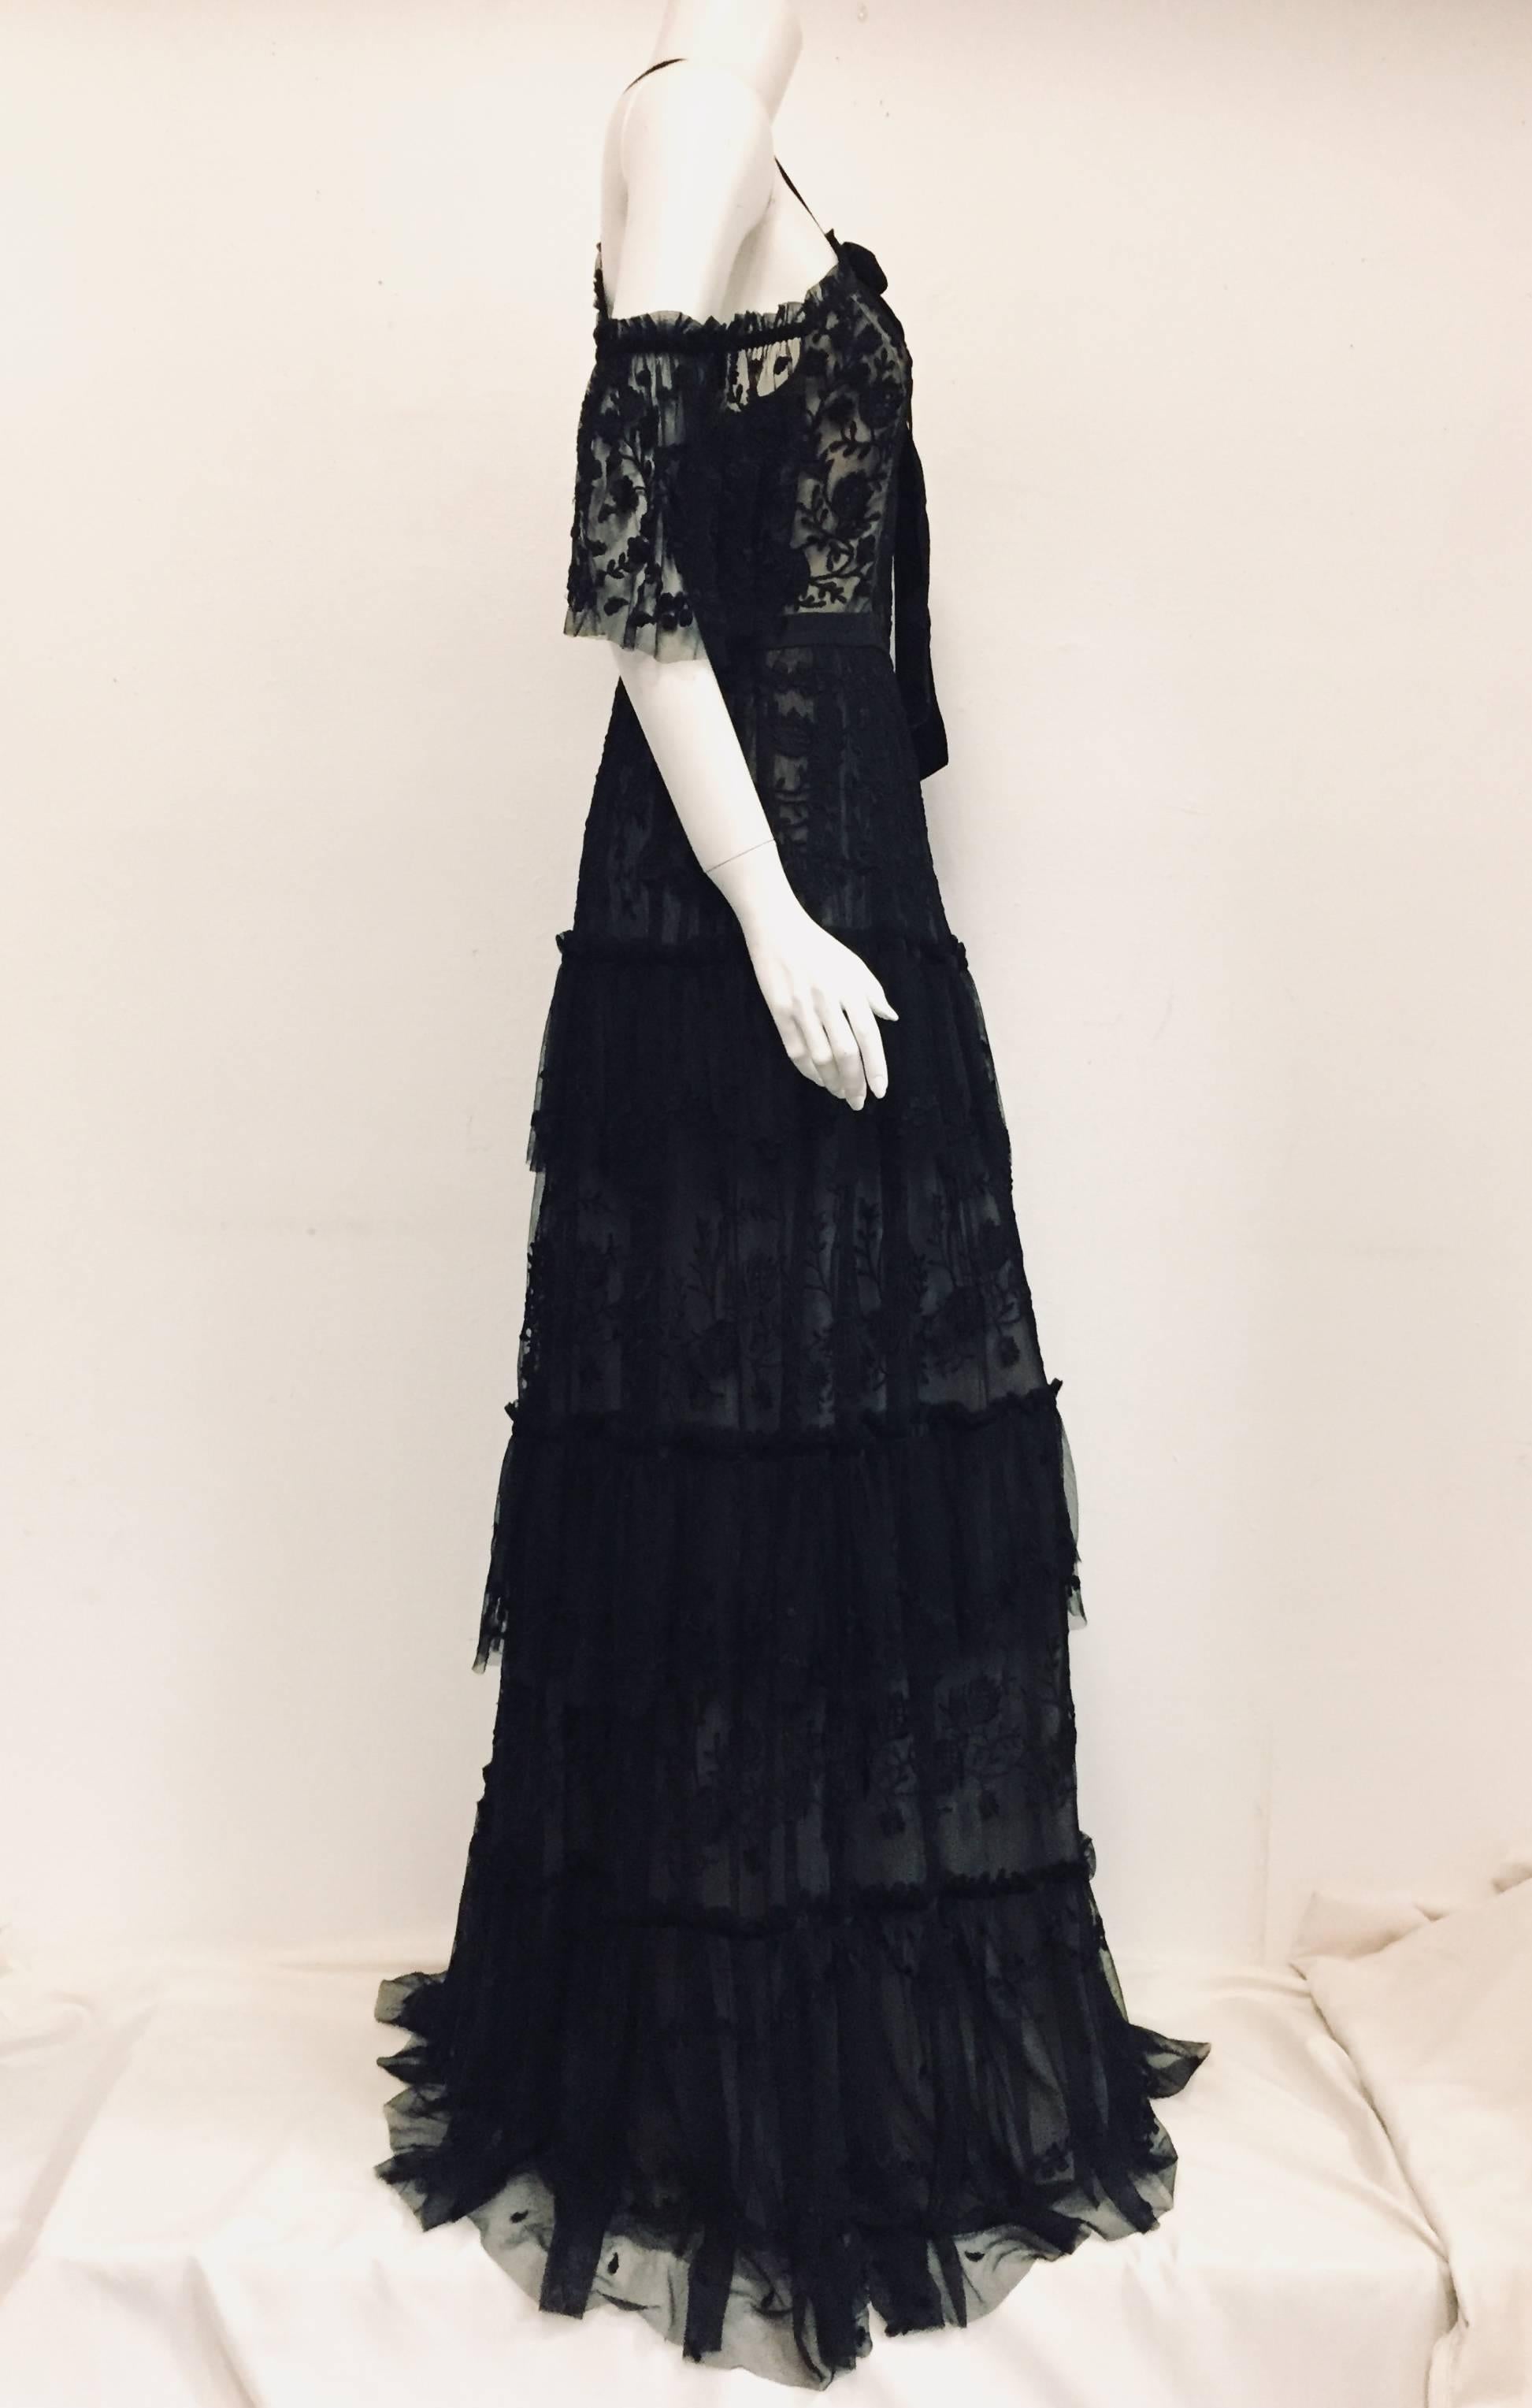 Needle & Thread's creative director Hannah Coffin works closely with skilled artisans to create her embellished designs. Inspired by the Andromeda Galaxy, this gown is cut from delicate embroided tulle.  The gown is decorated with a black velvet 